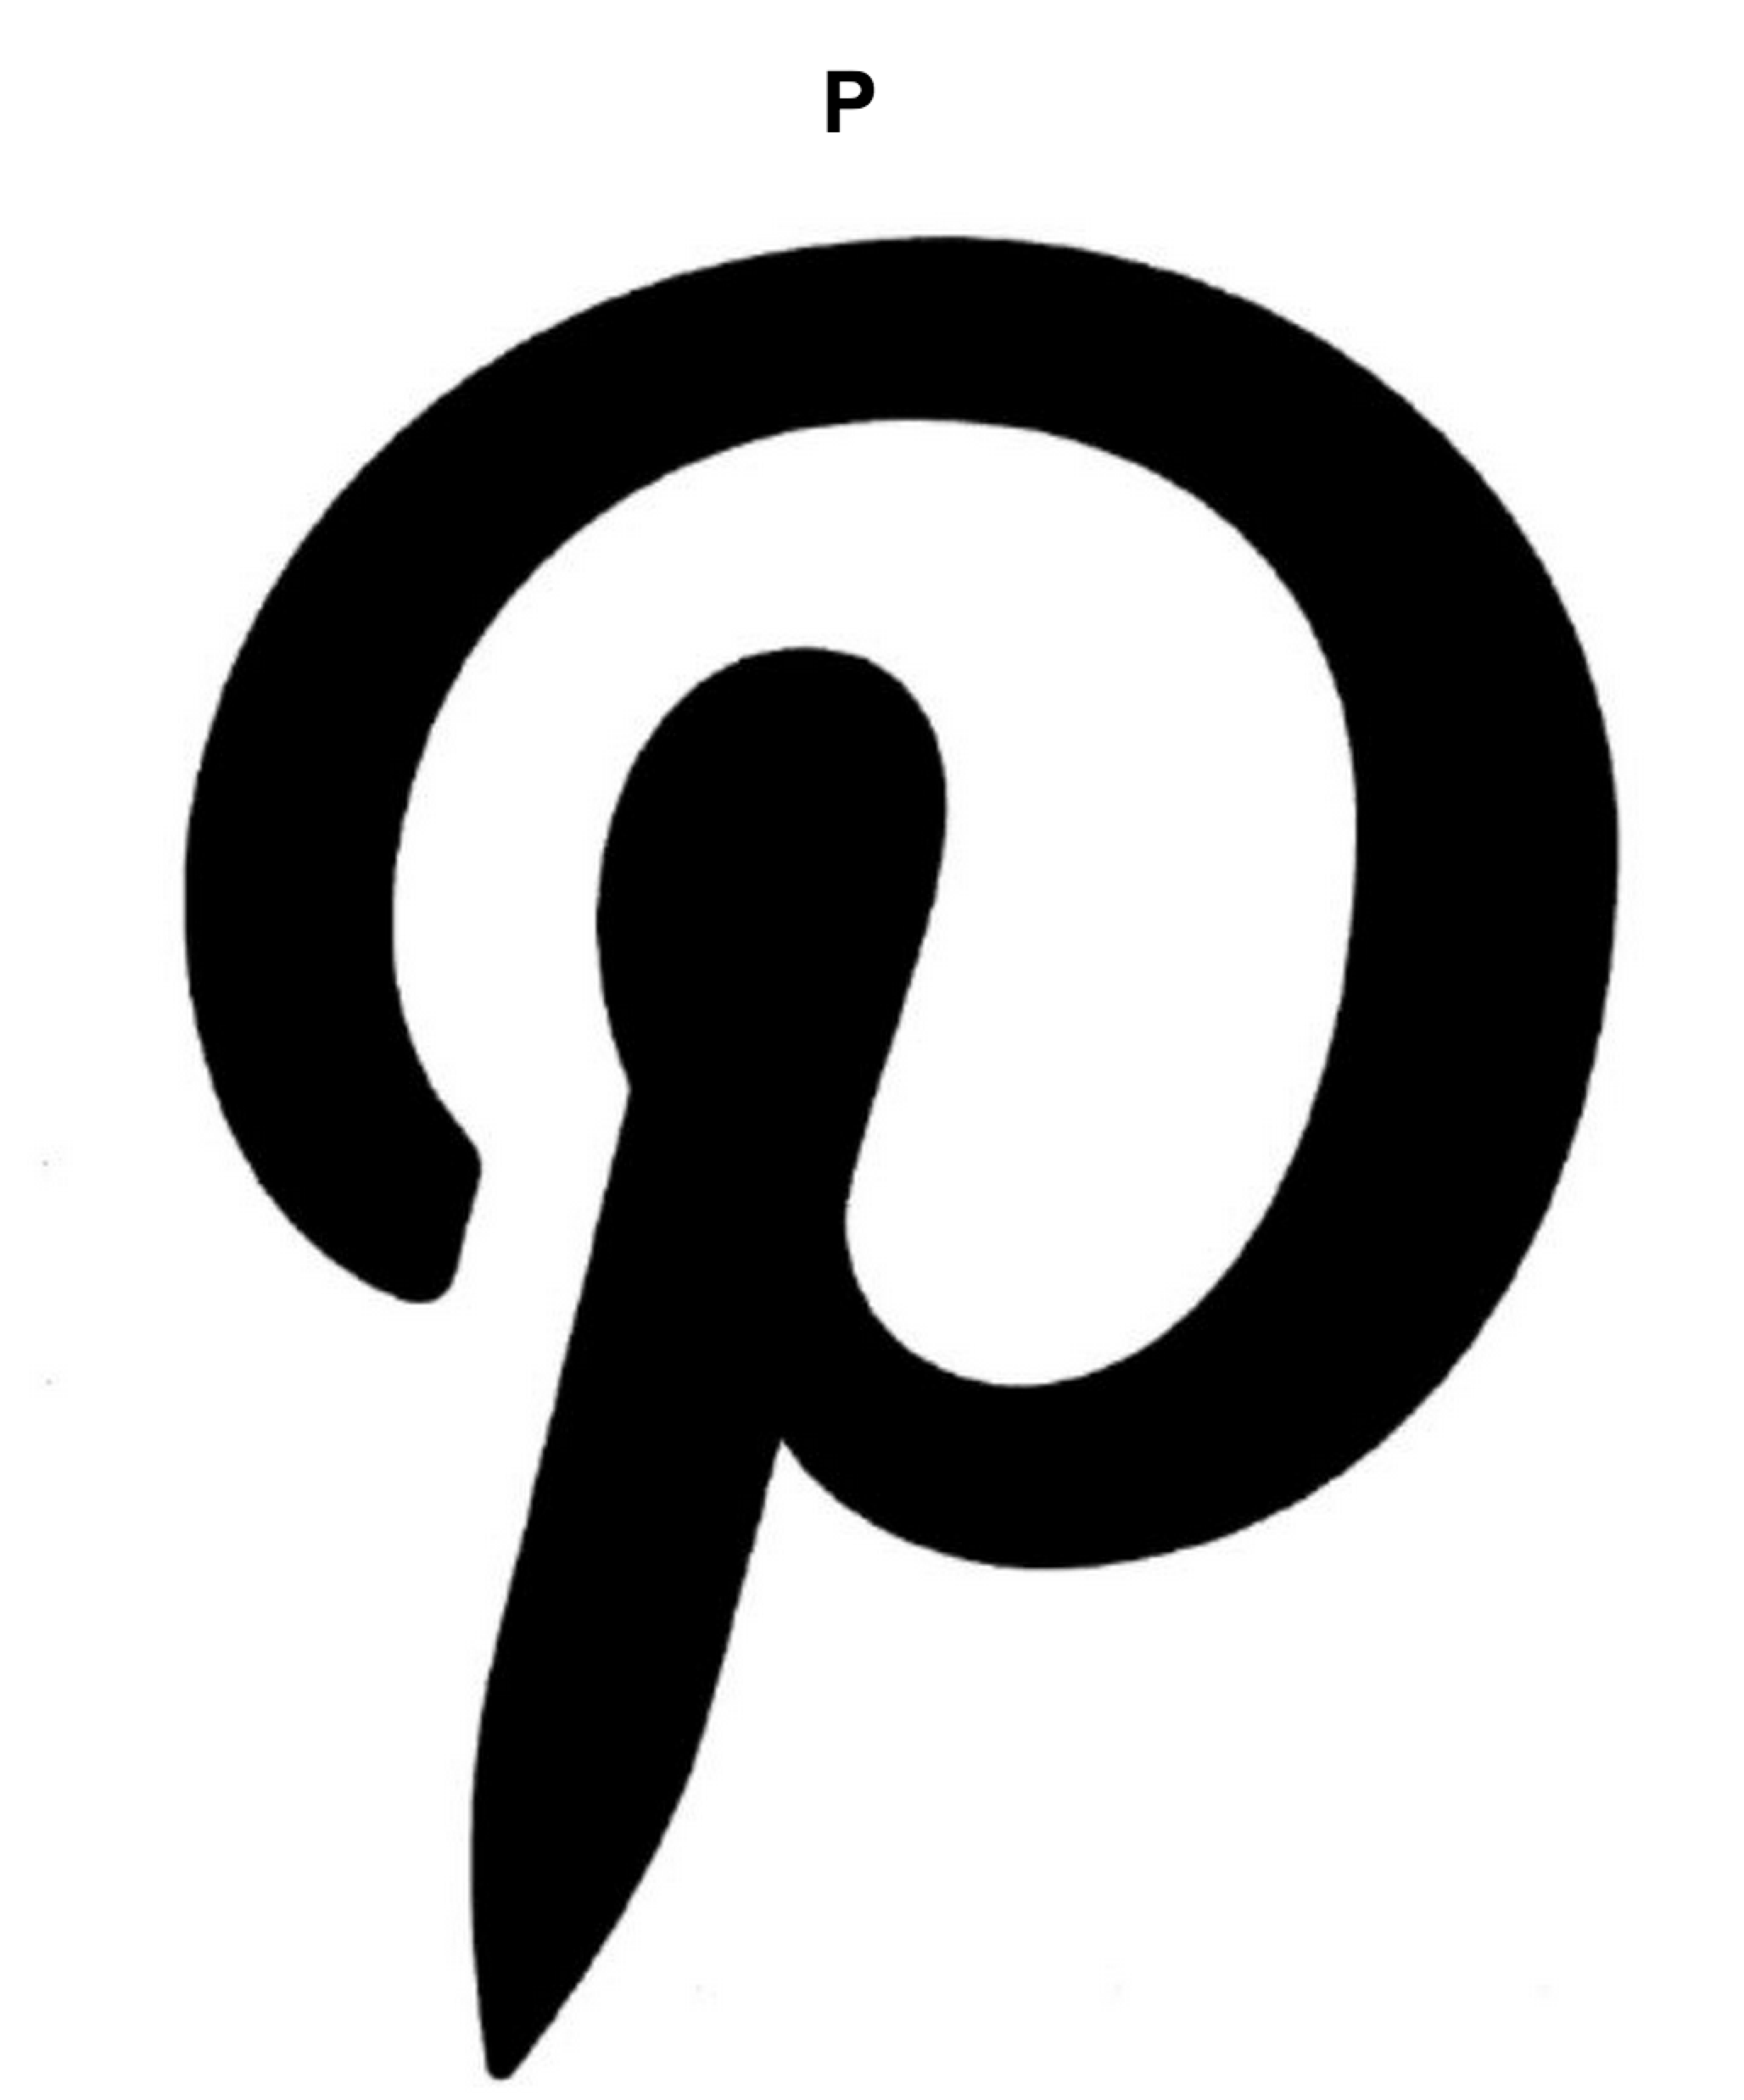 Pinterest And Path To Battle Over Letter “P” Logo Trademark 